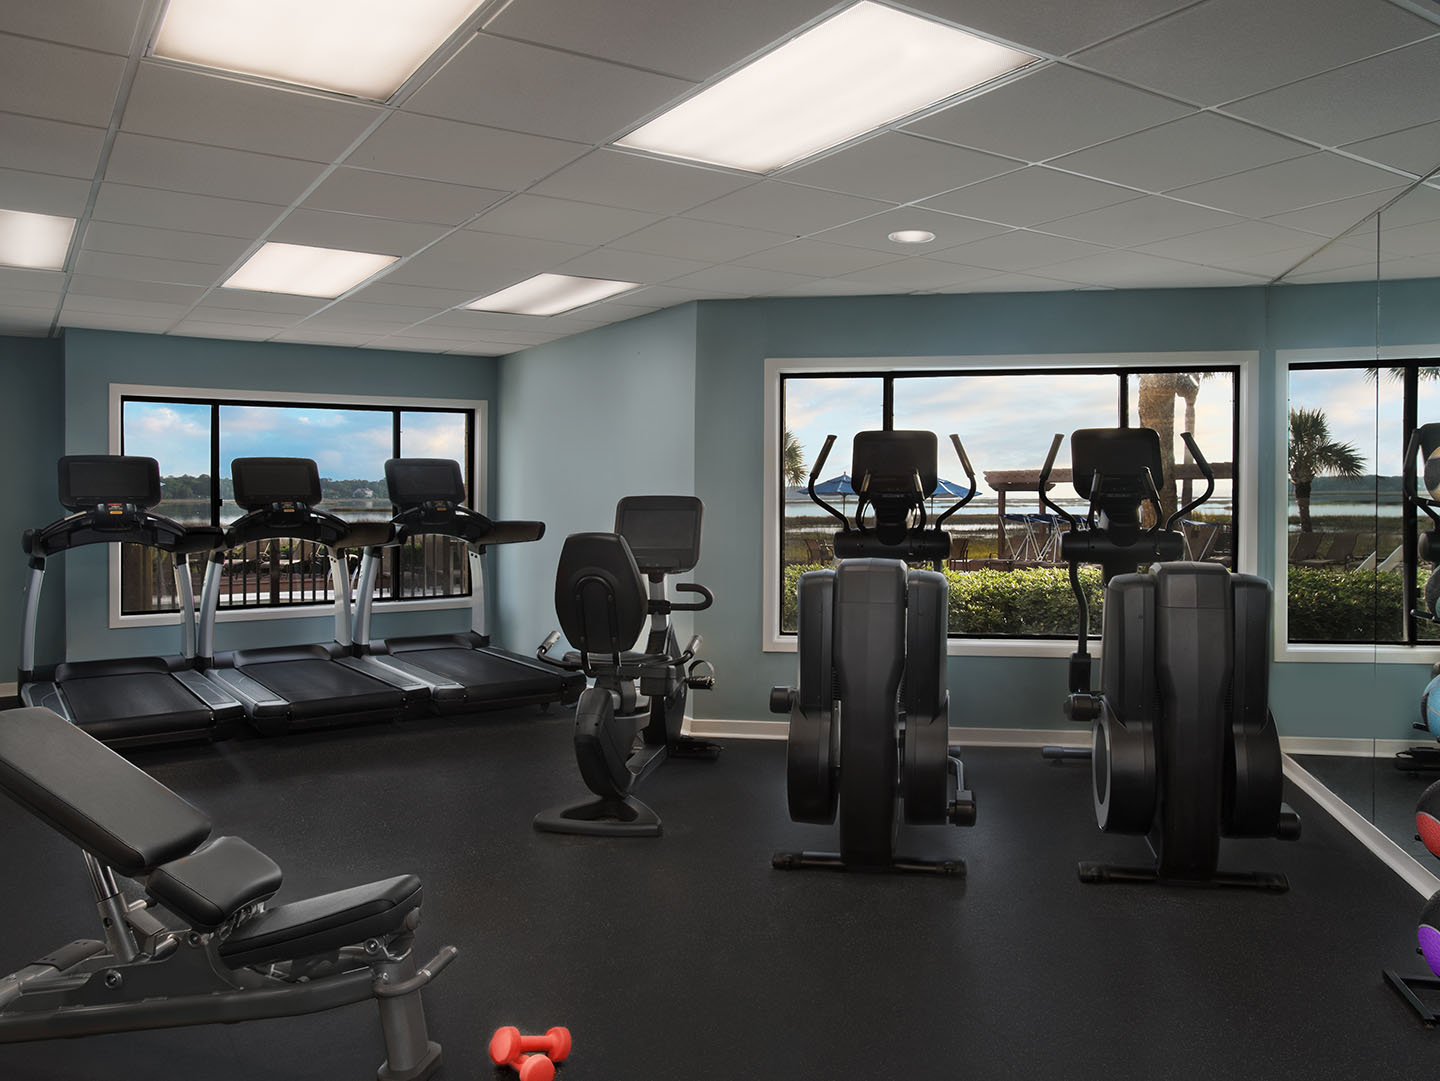 Marriott's Sunset Pointe Fitness Center. Marriott's Sunset Pointe is located in Hilton Head Island, South Carolina United States.